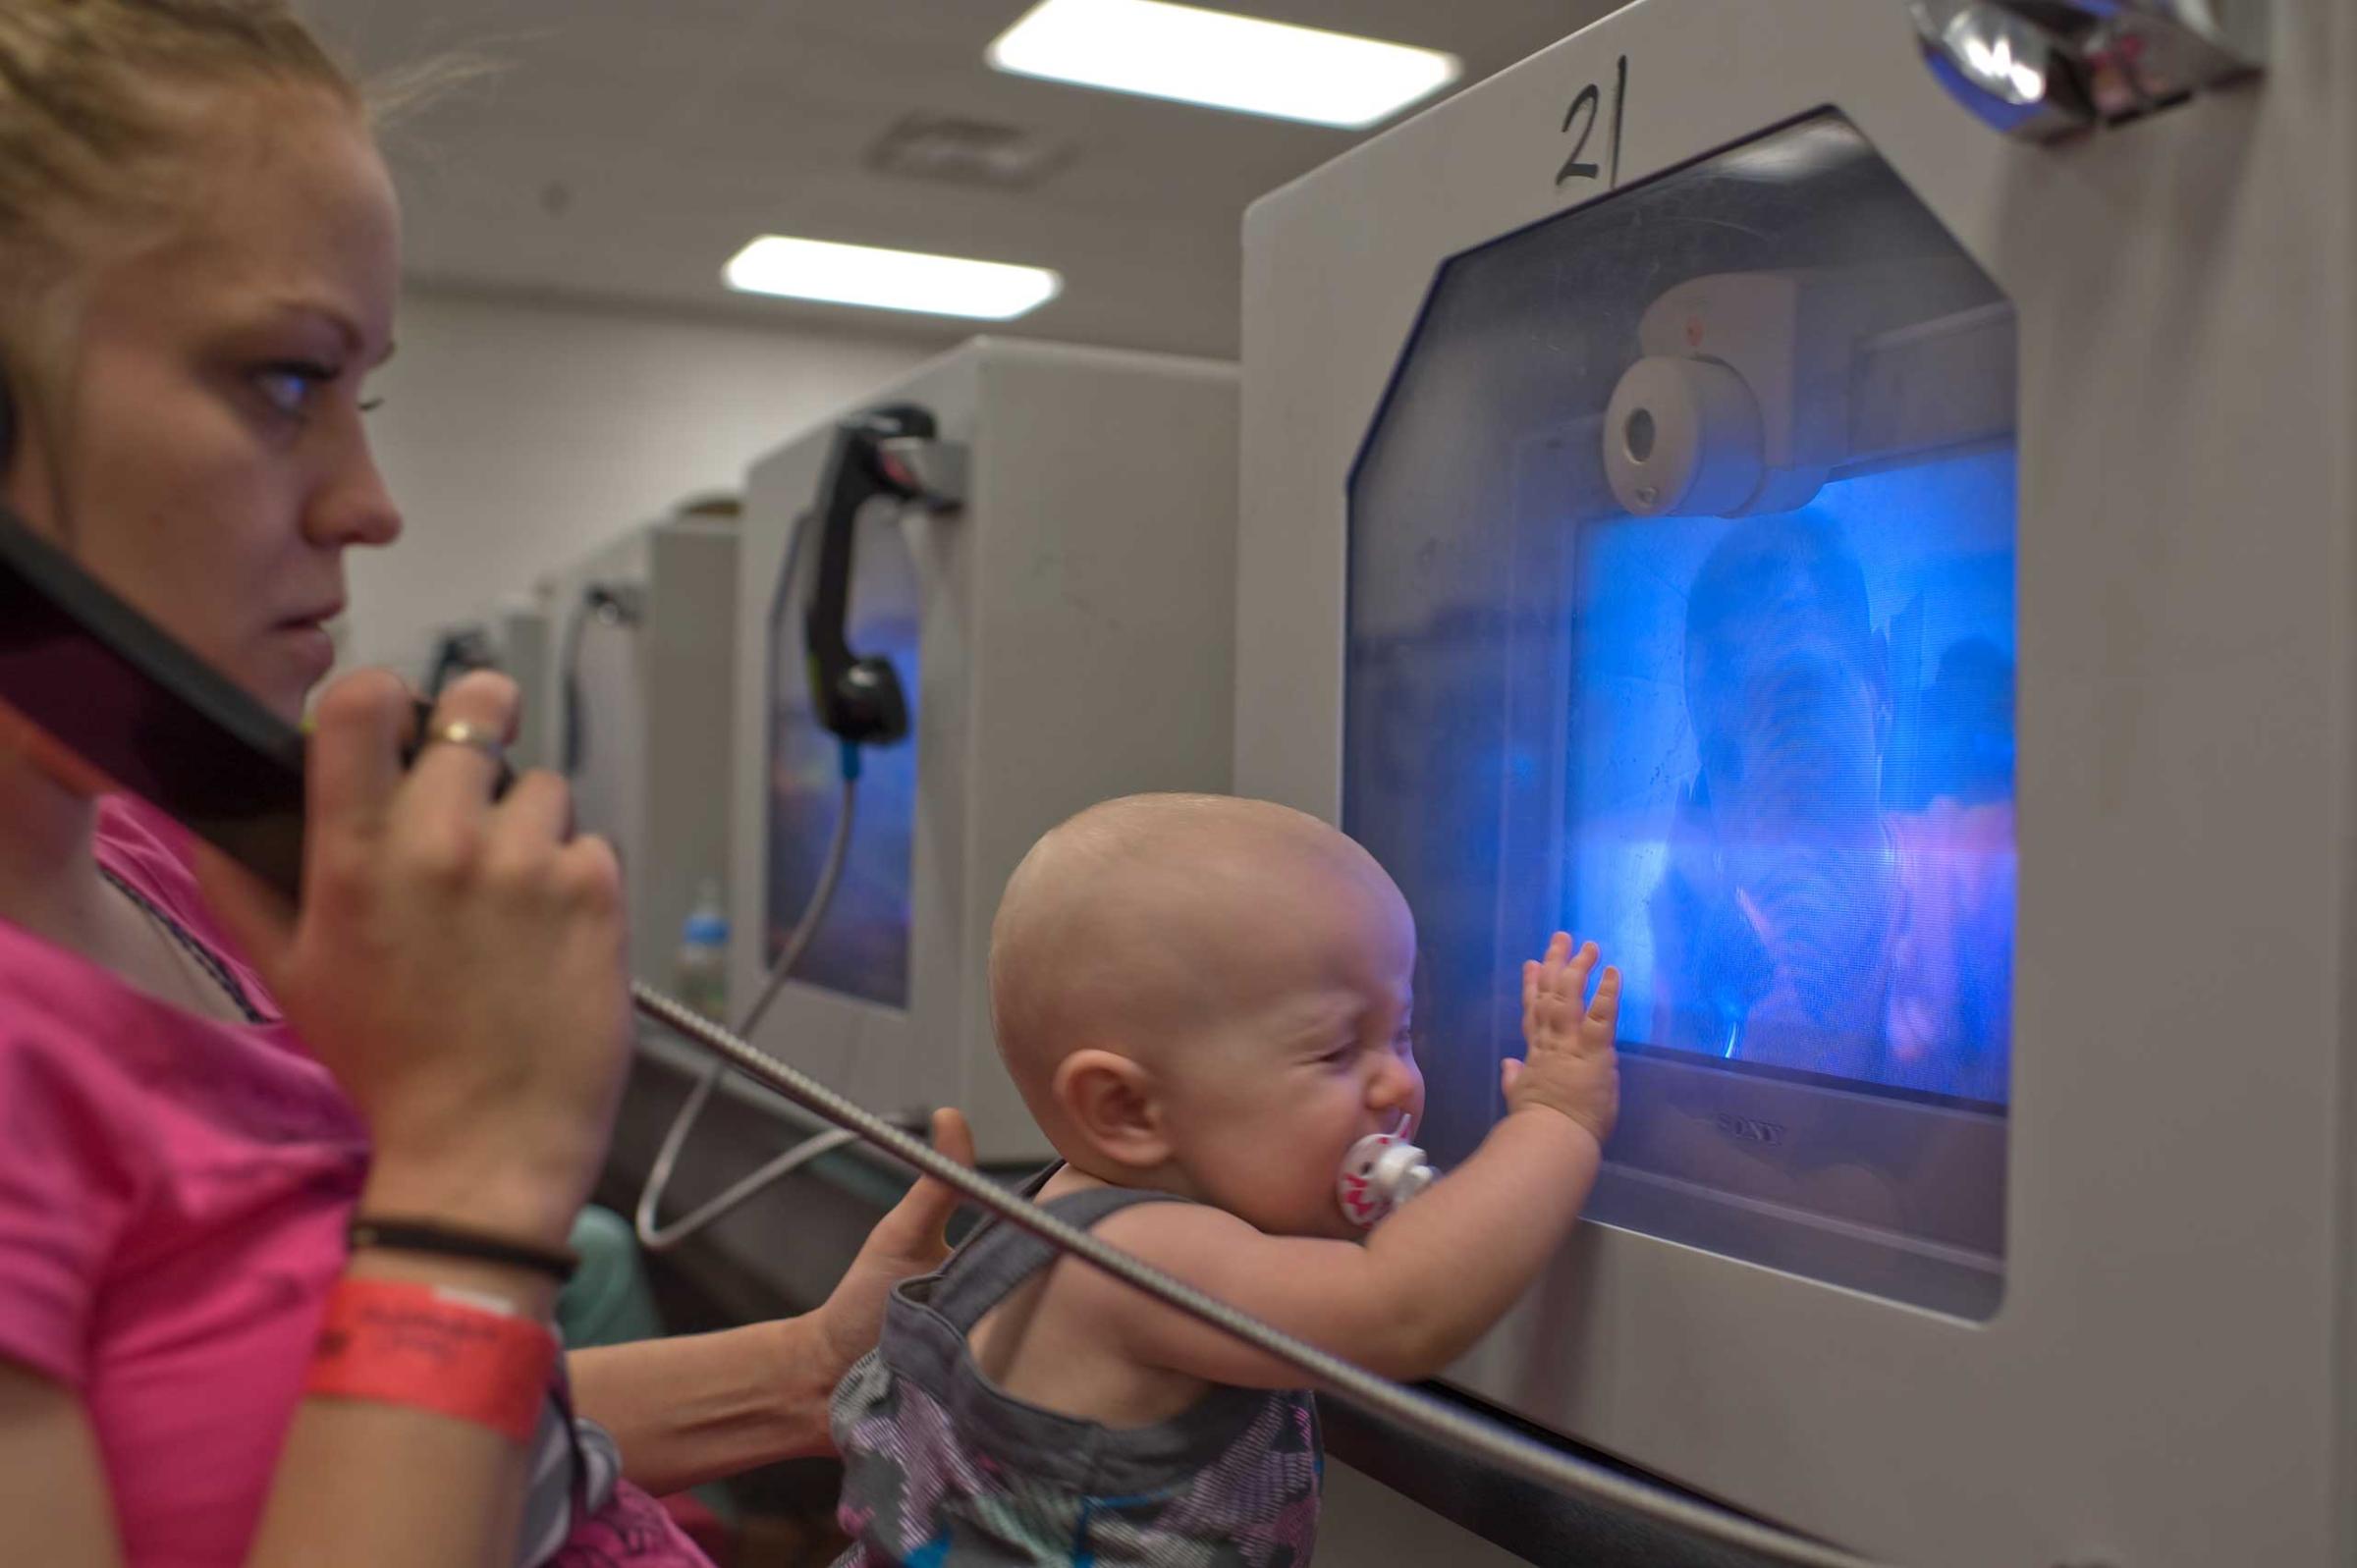 Felicia and their 10-month-old daughter Lily see David through video visitation.